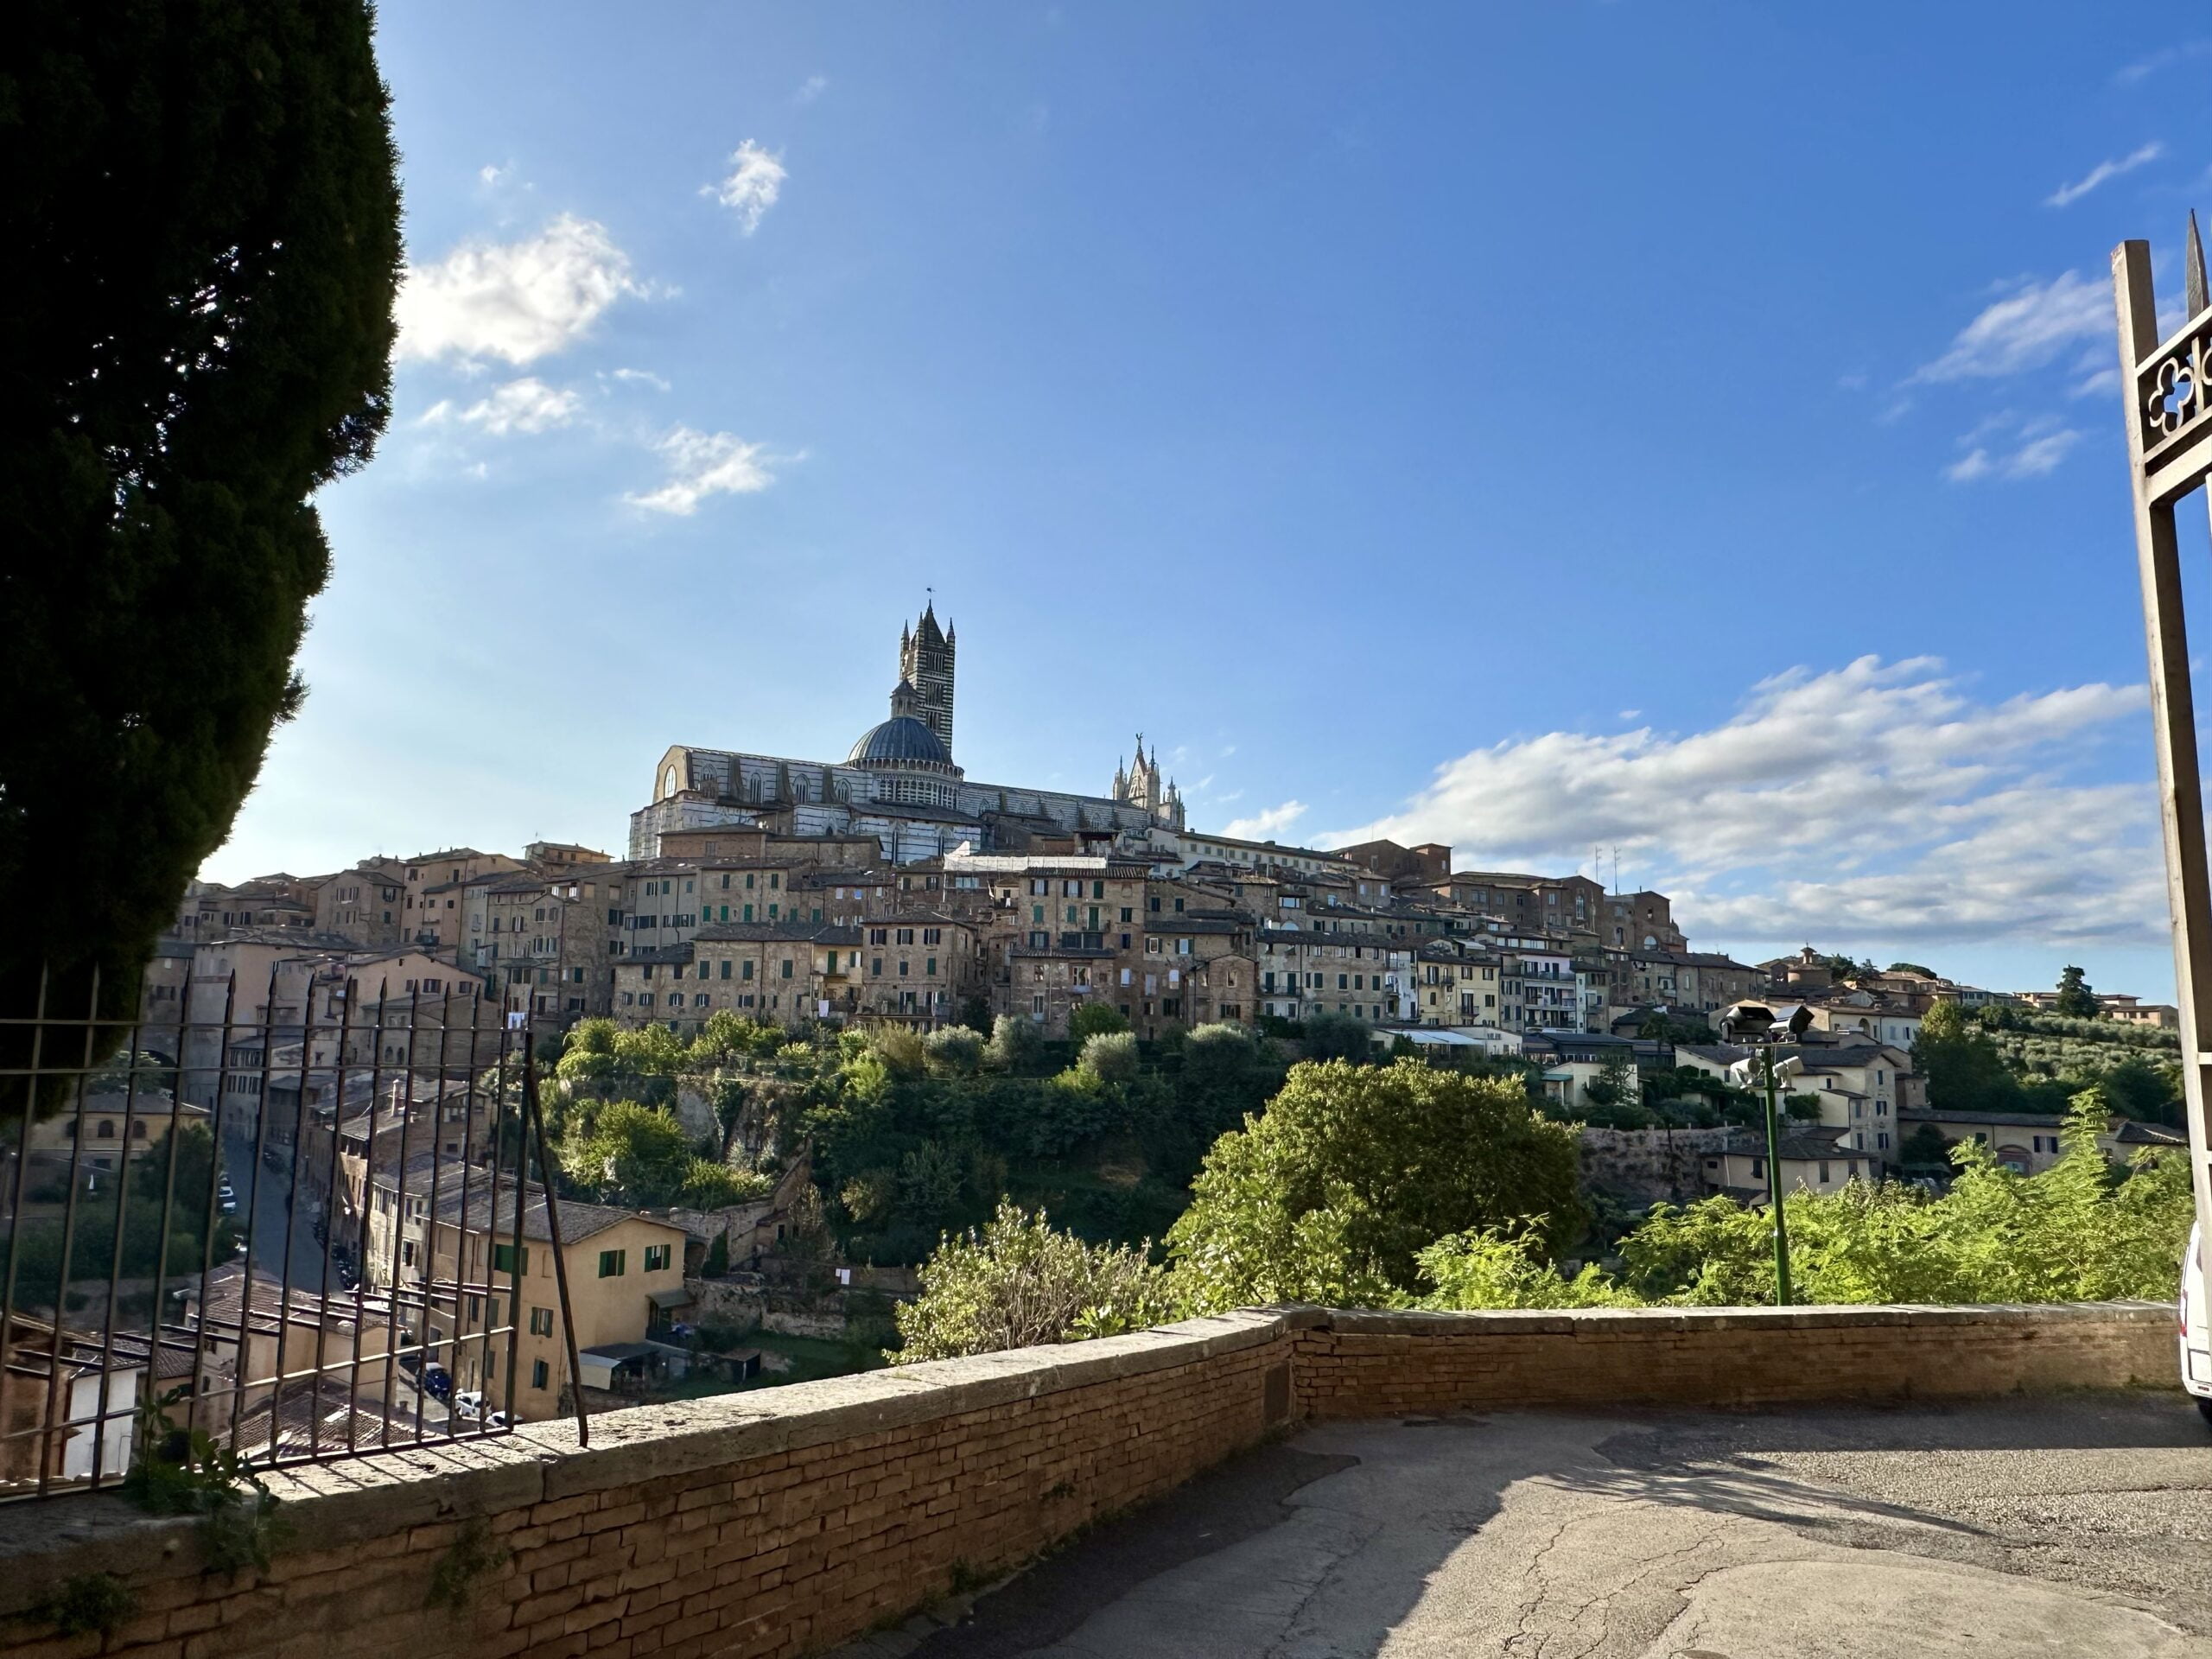 The hilltop medieval city of Siena in the heart of Tuscany